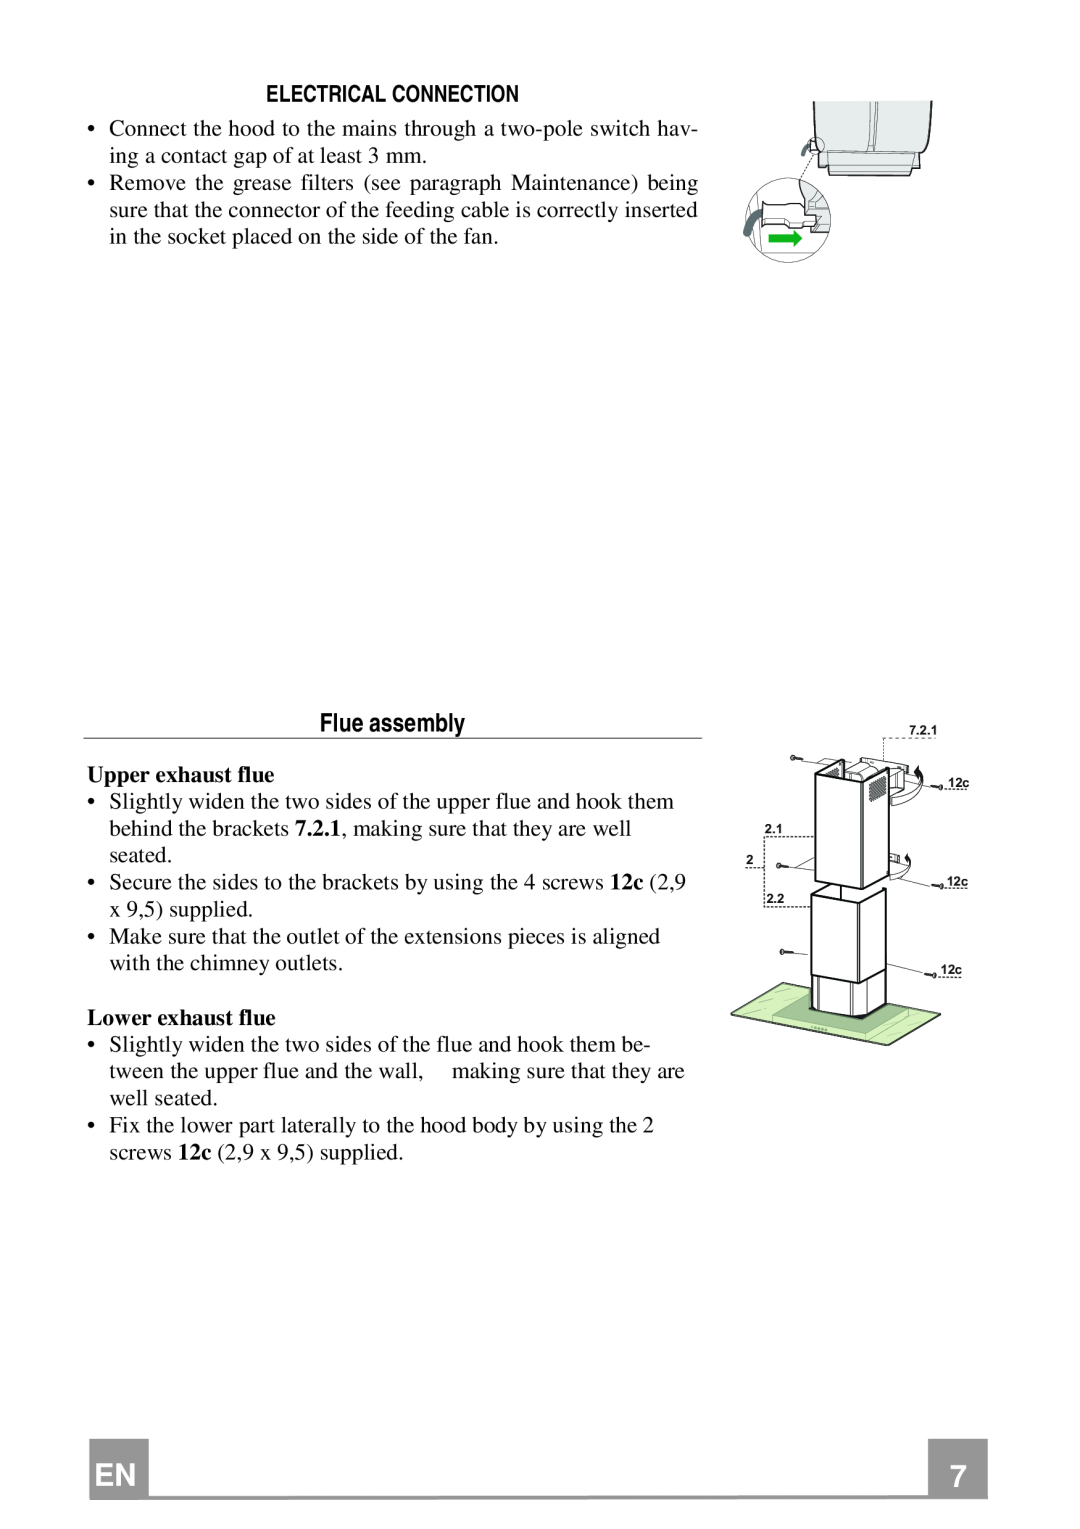 Franke Consumer Products FGL 7015 XS manual Flue assembly, Upper exhaust flue, Lower exhaust flue, Electrical Connection 